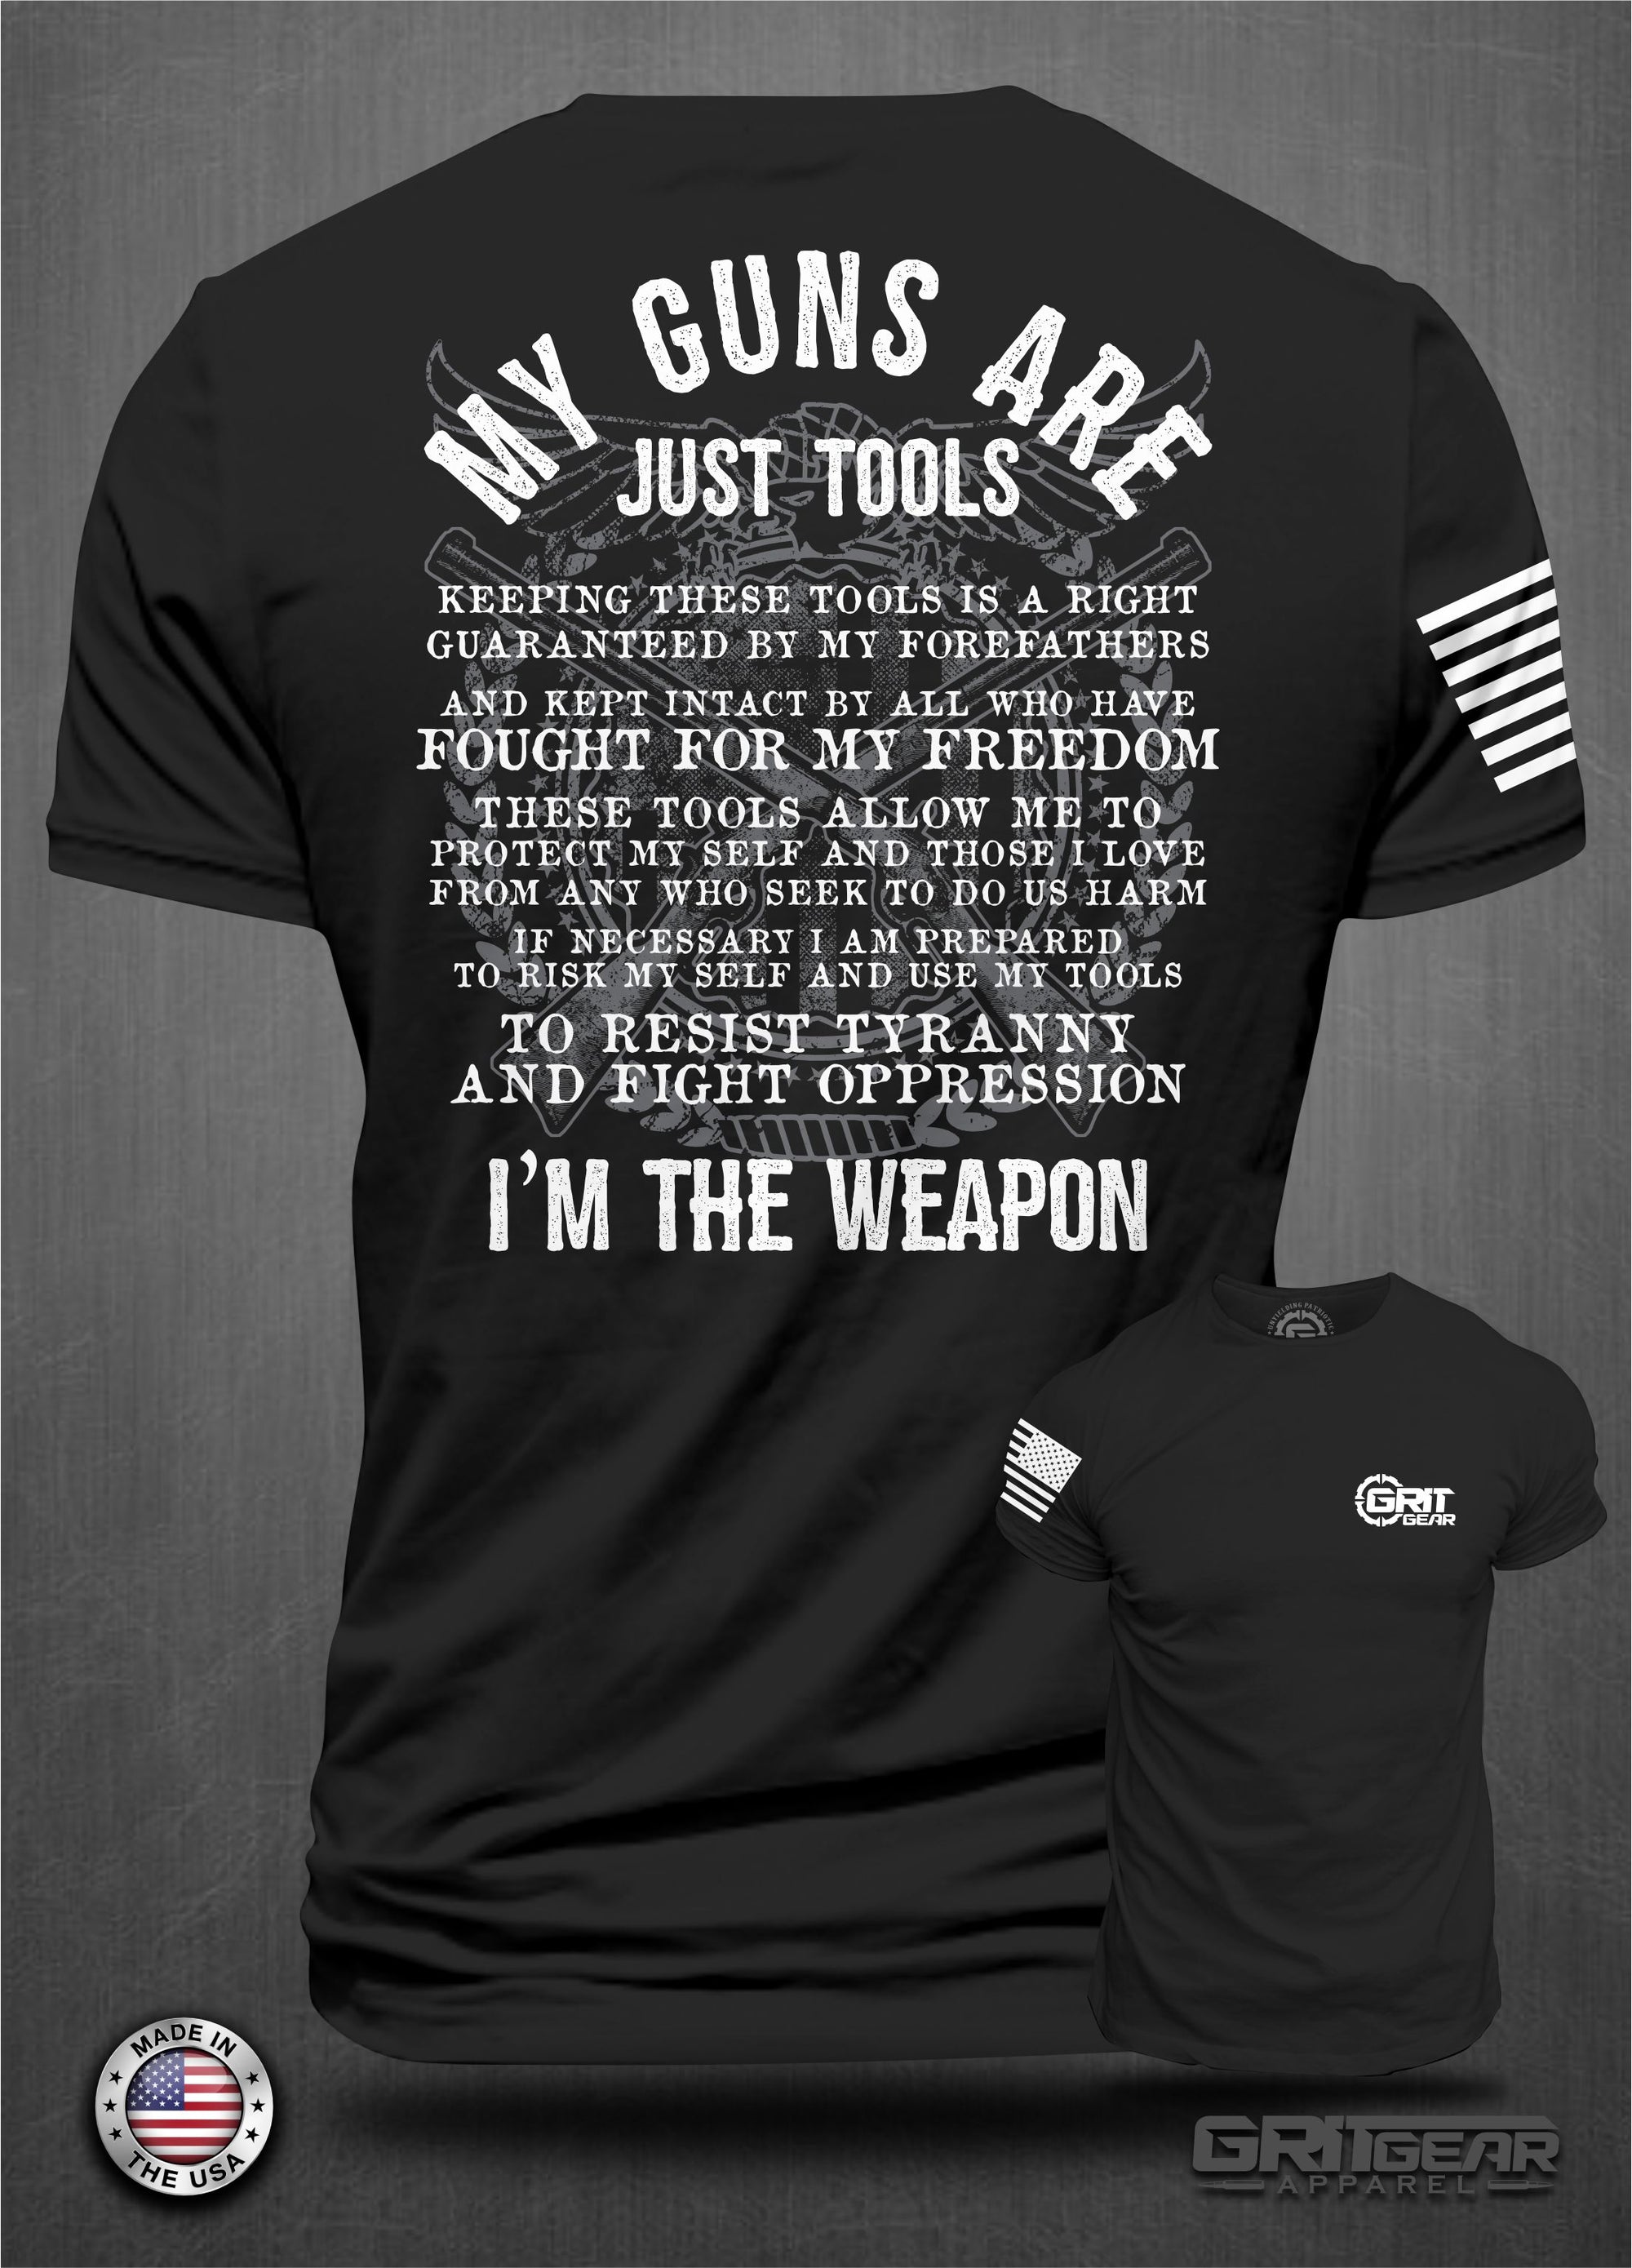 My Guns are Just Tools, T-shirt | Grit Gear Apparel